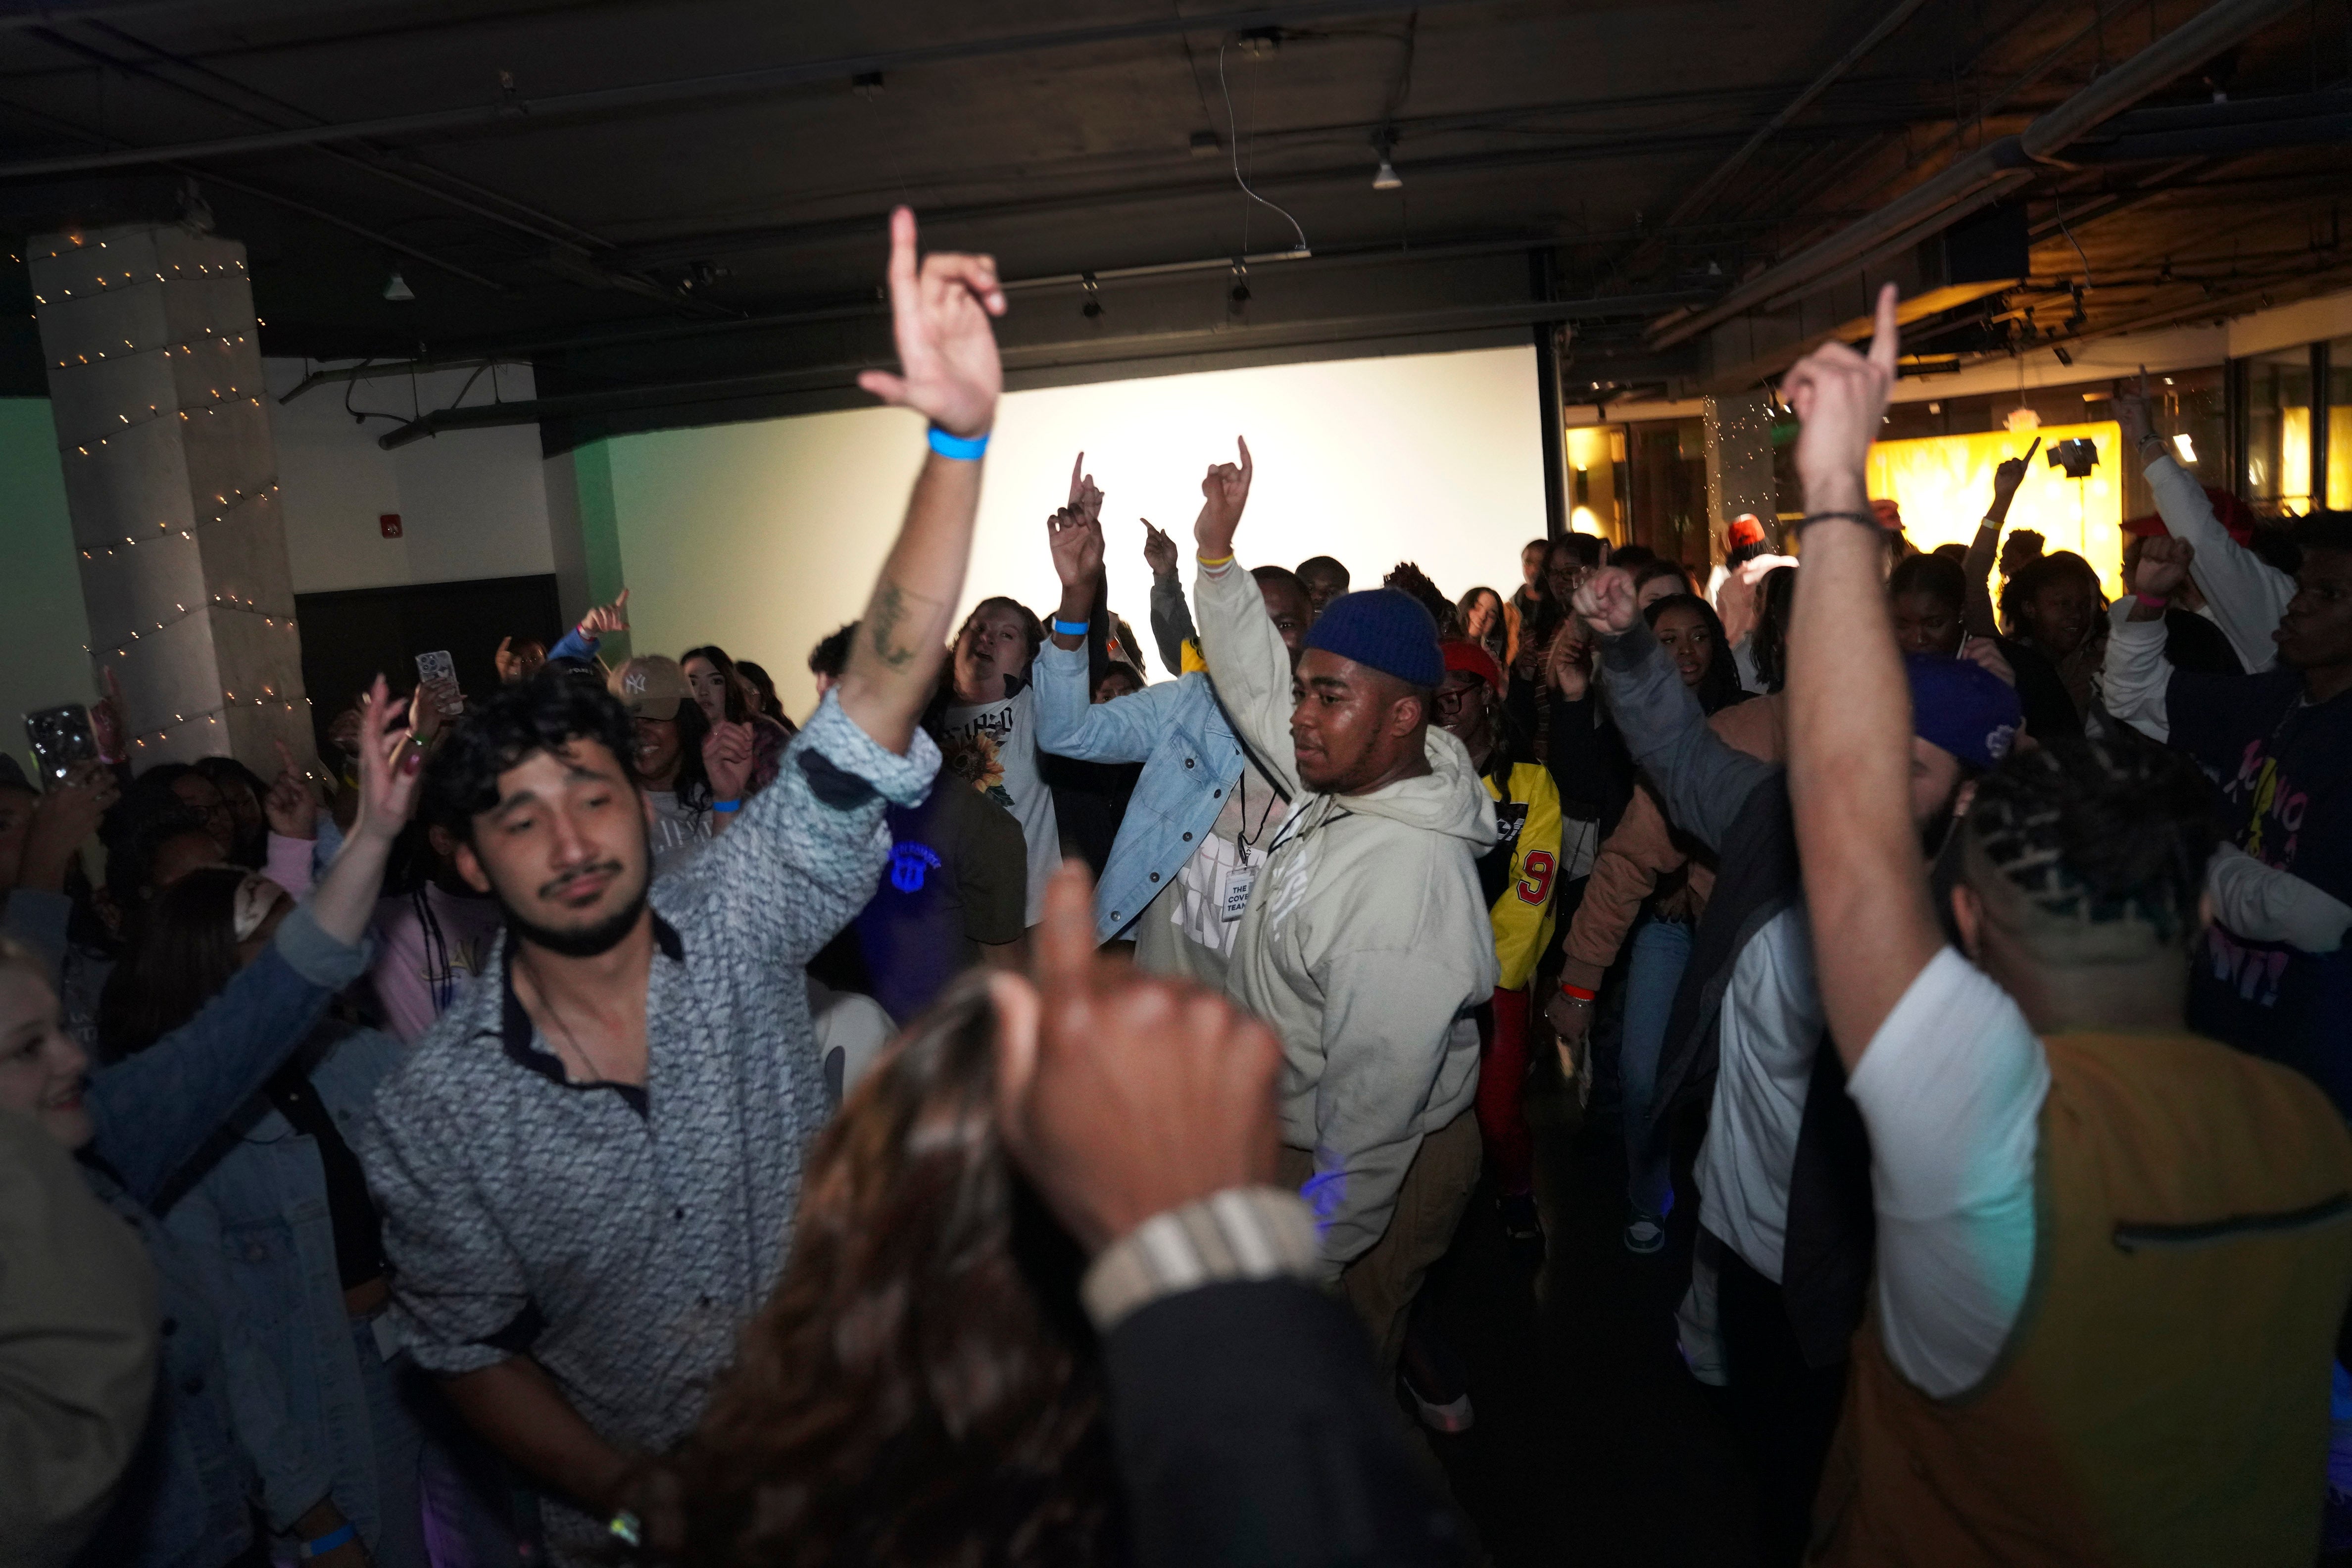 Attendees at The Cove, an 18-and-up, pop-up Christian nightclub, dance in unison